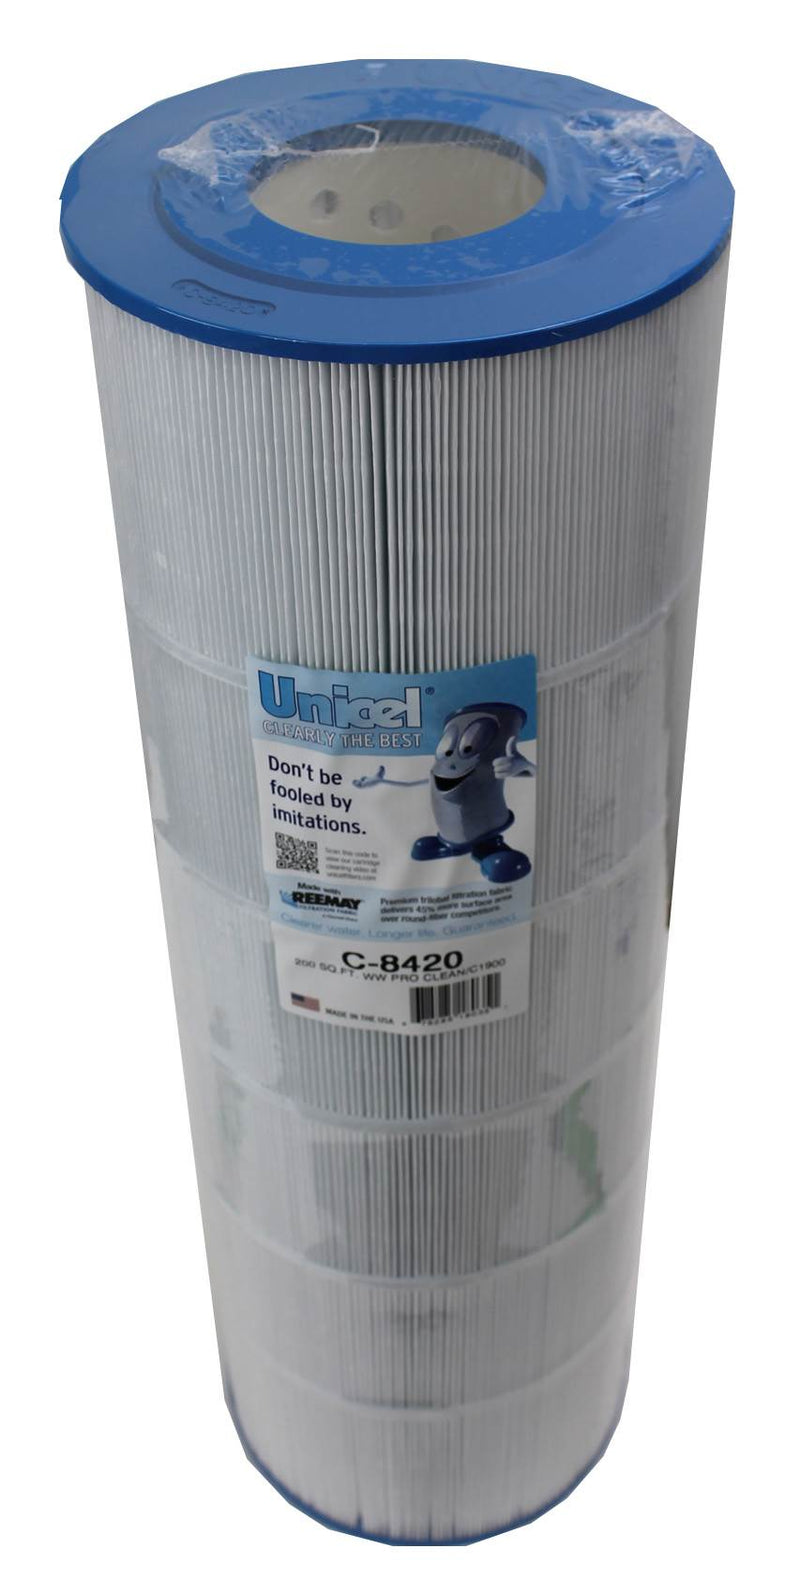 Unicel C-8420 Replacement 200 Sq Ft Swimming Pool Filter Cartridge, 236 Pleats